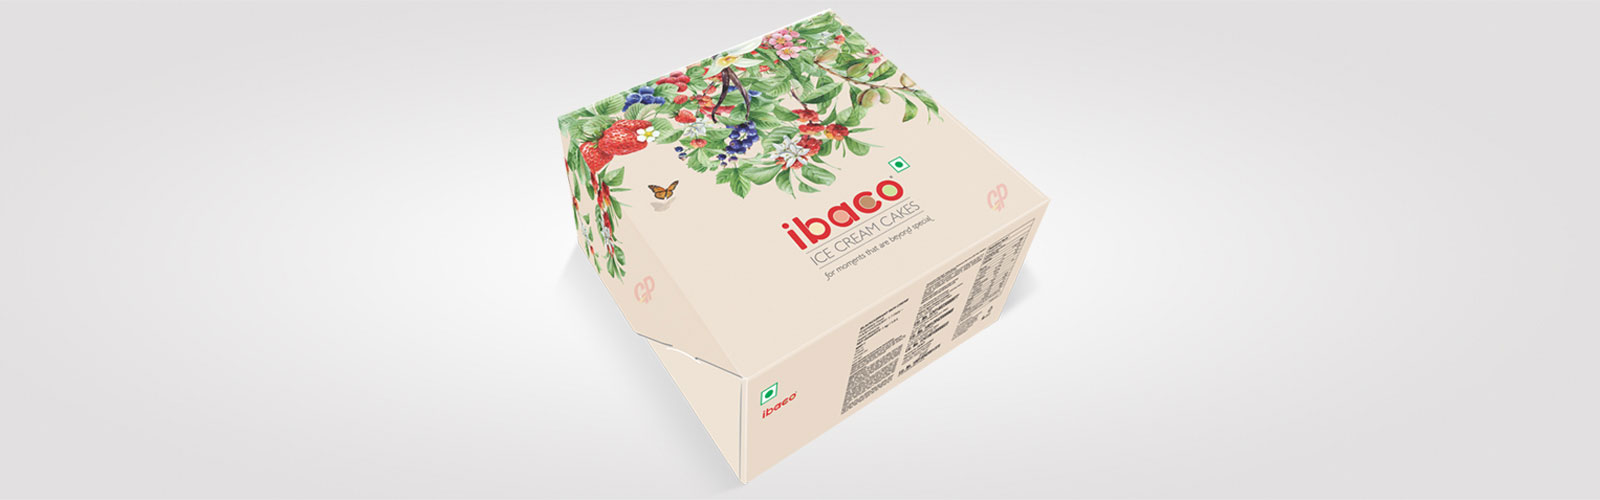 Cake Boxes - Packaging Source